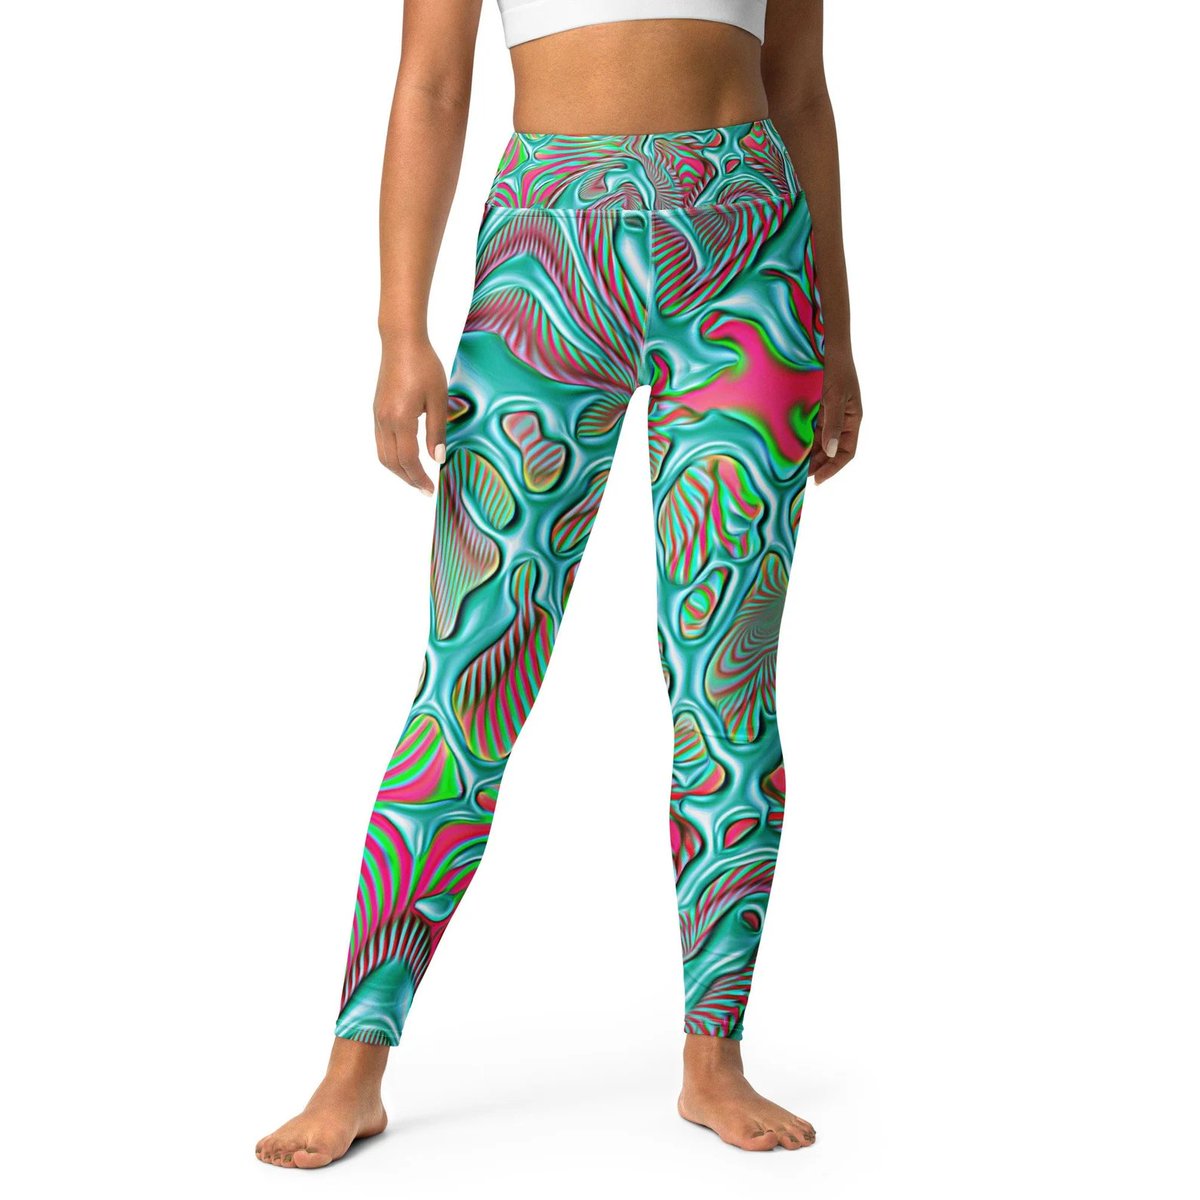 #BlackNovember has kicked off in our @Etsy shop! Get 25% off all #yogaleggings, including these  'Hypnotic Slime High-Waisted Yoga Leggings' for a limited time. No code necessary. Valid in the #USA.

➡️bigtexfunkadelic.etsy.com/listing/728457…

#BigTexFunkadelic #etsyfinds #psychedelic #giftideas